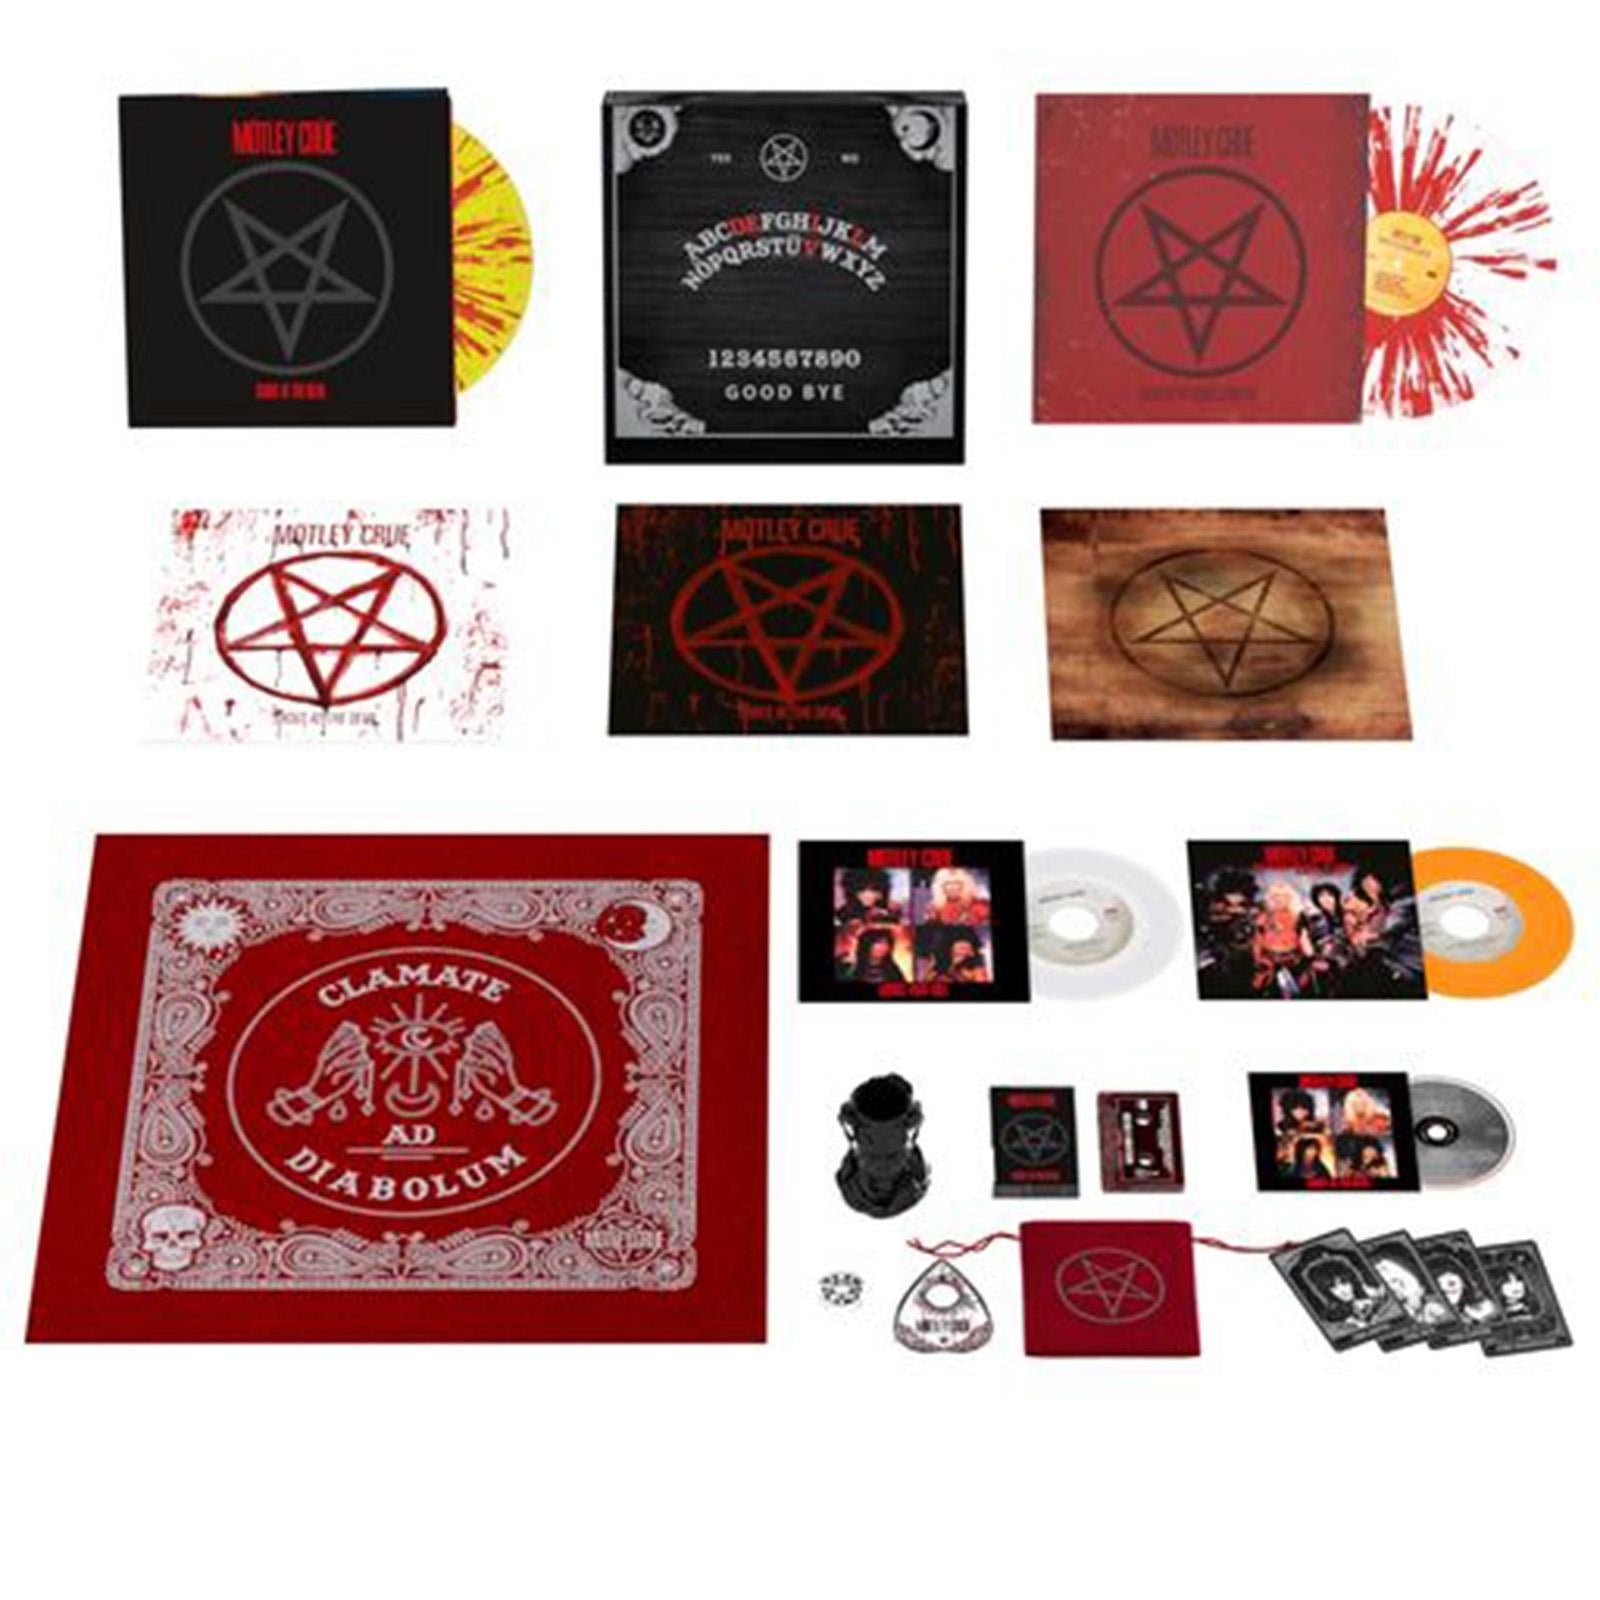 shout at the devil (40th anniversary limited superdeluxe vinyl boxset)